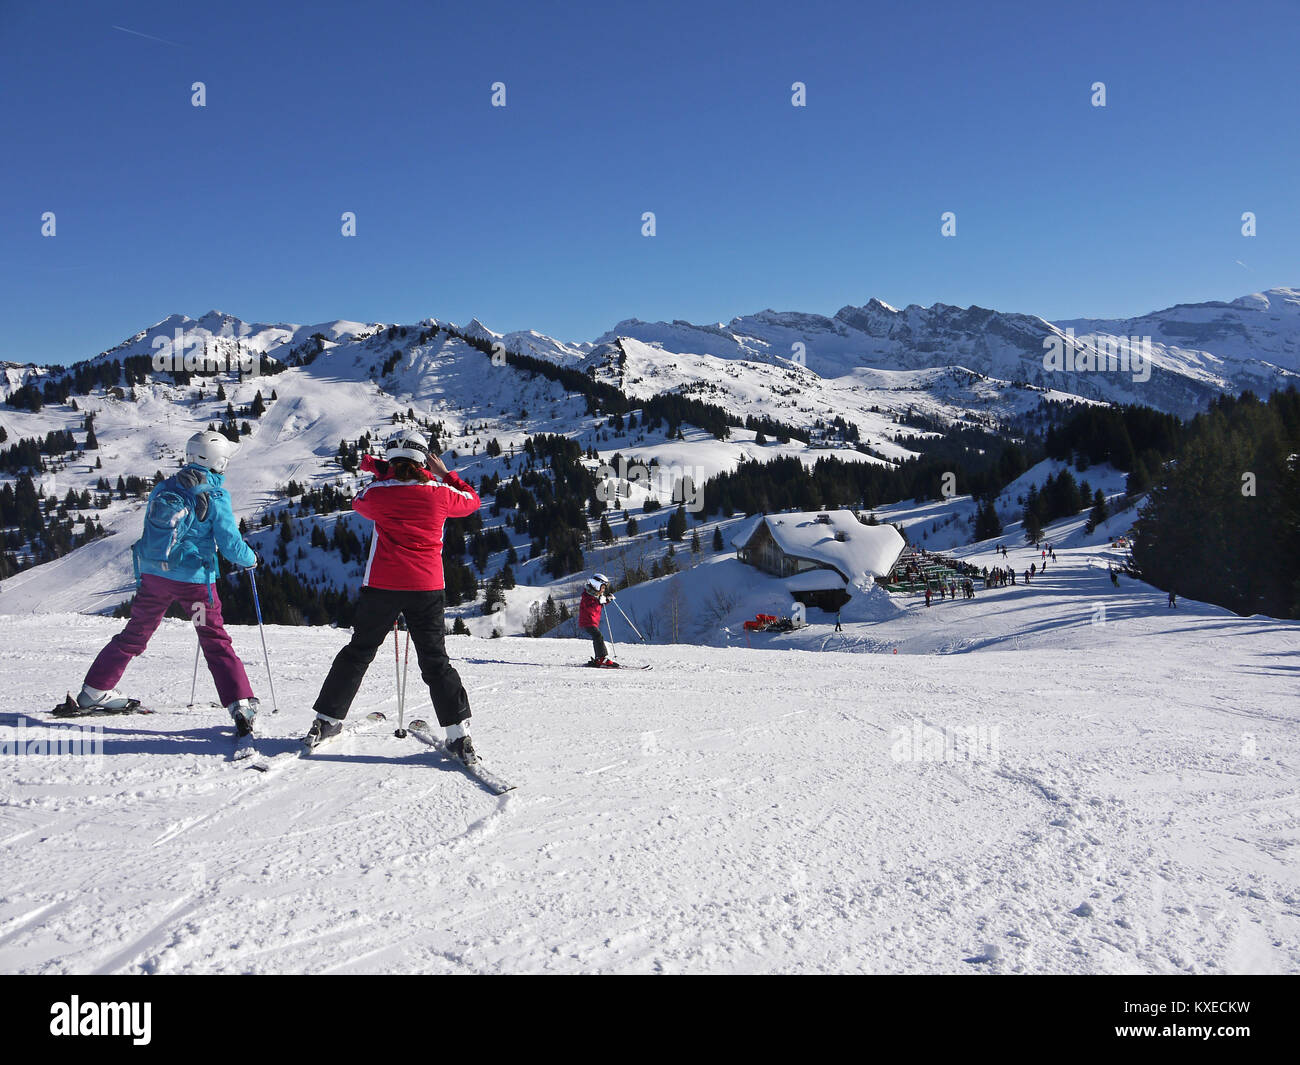 Above the Mouflon Restaurant in the ski and snowboard resort of Les Gets, France Stock Photo